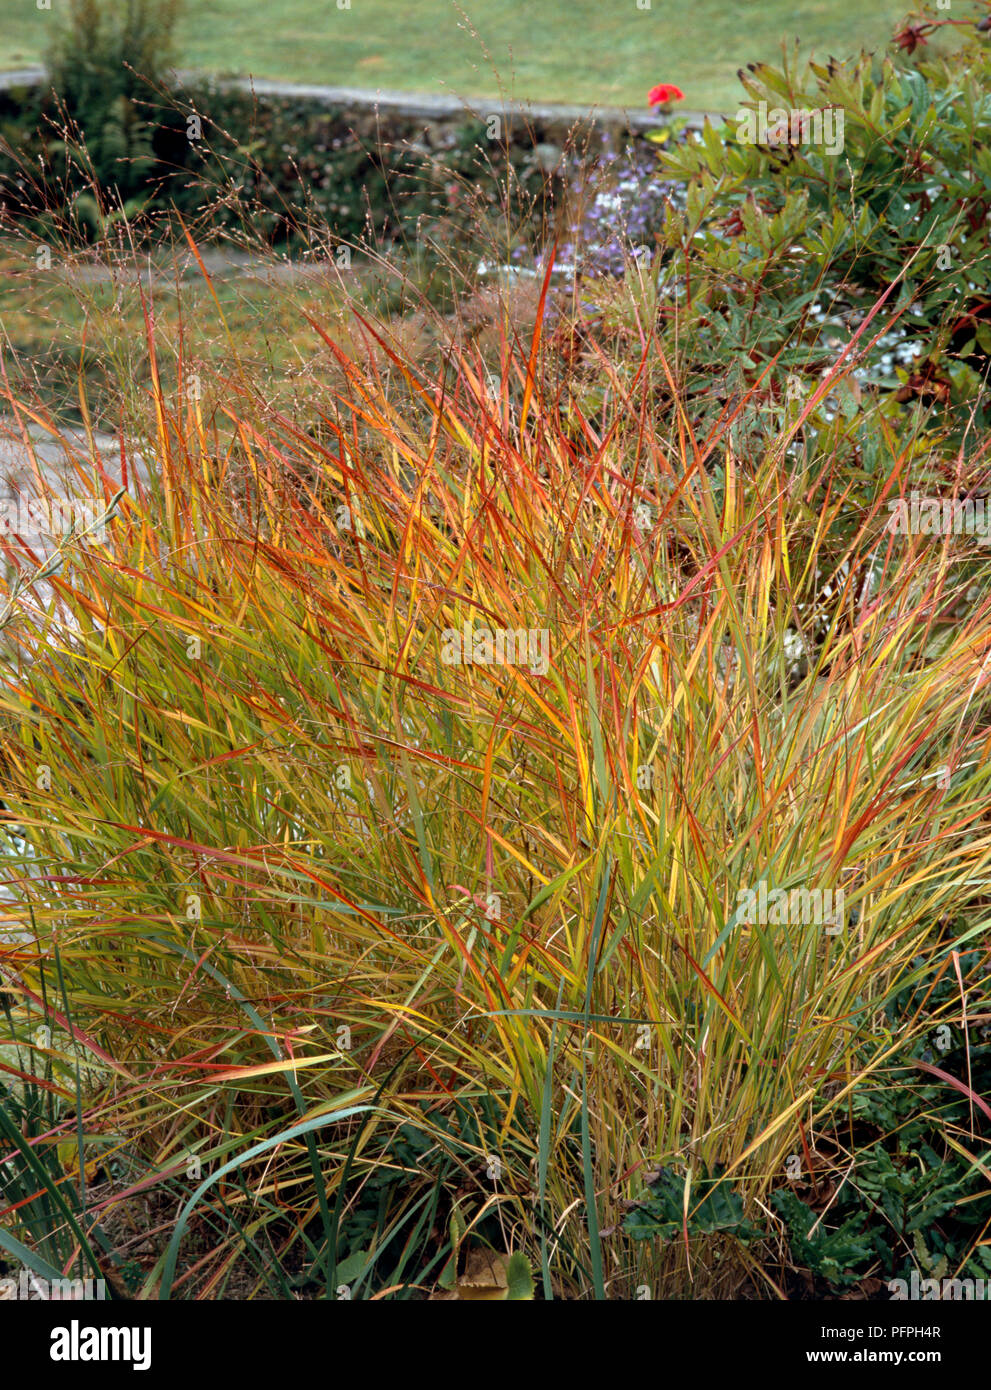 Carex sp. (Sedge), red and yellow ornamental grass in garden Stock Photo